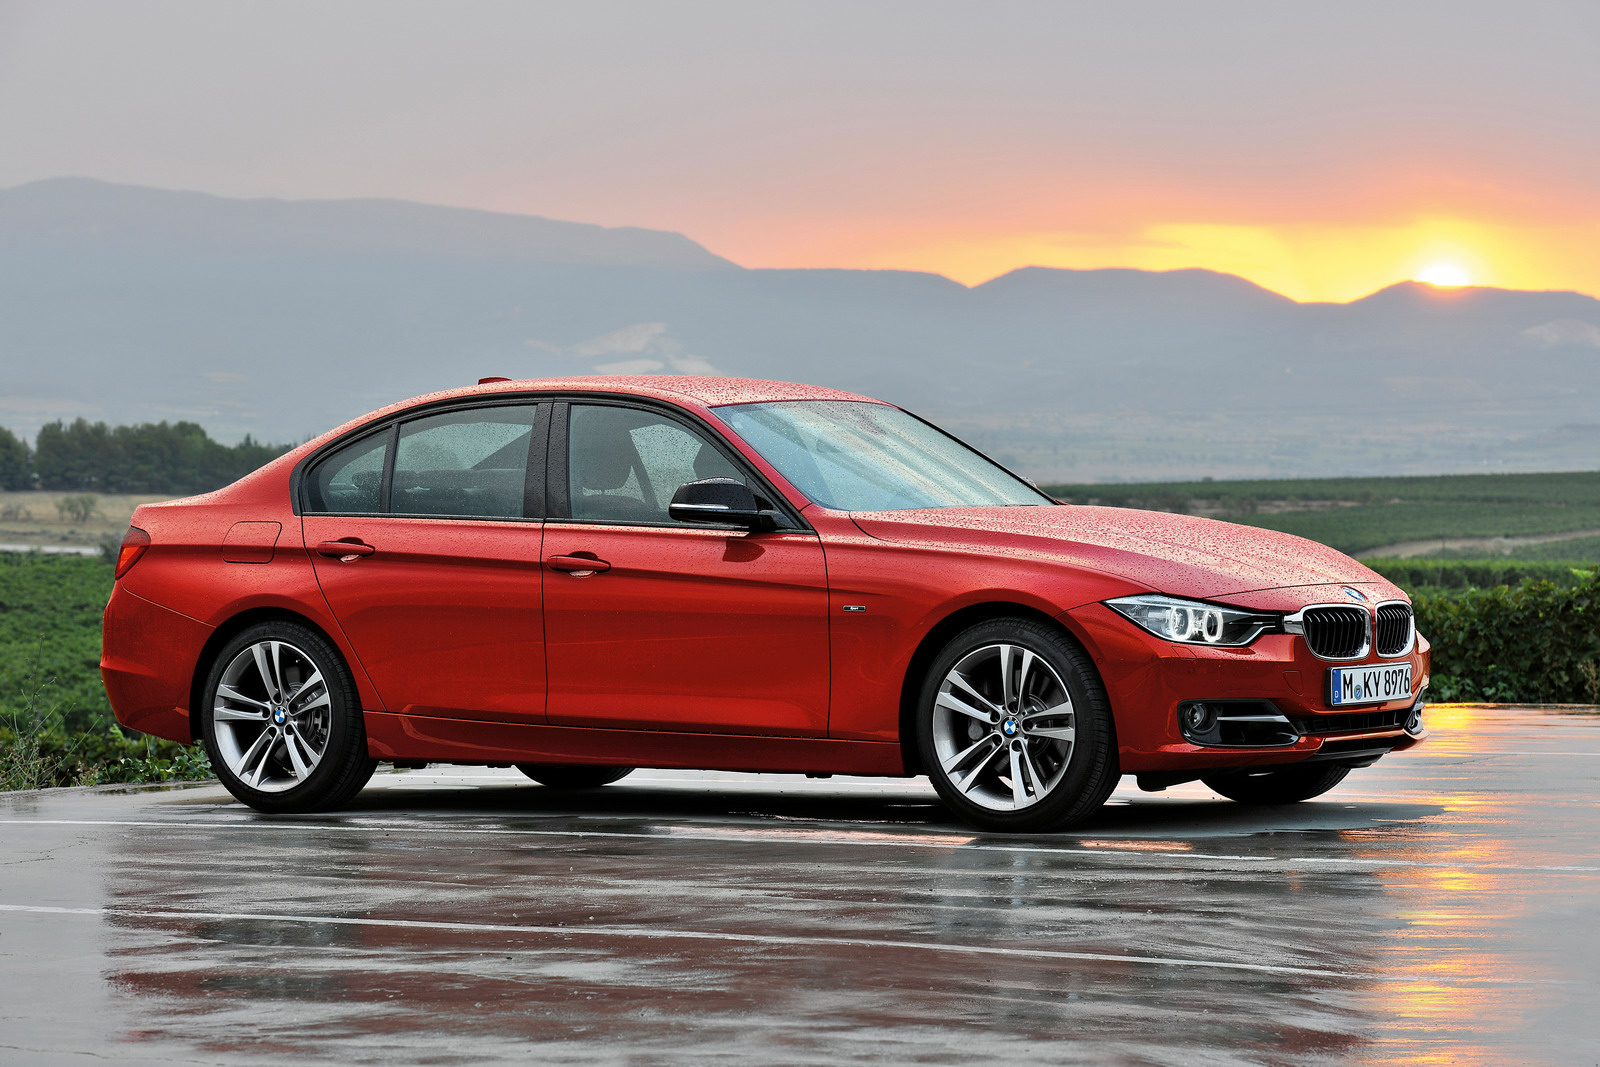 BMW 3 Series Price in Pakistan, Images, Reviews & Specs